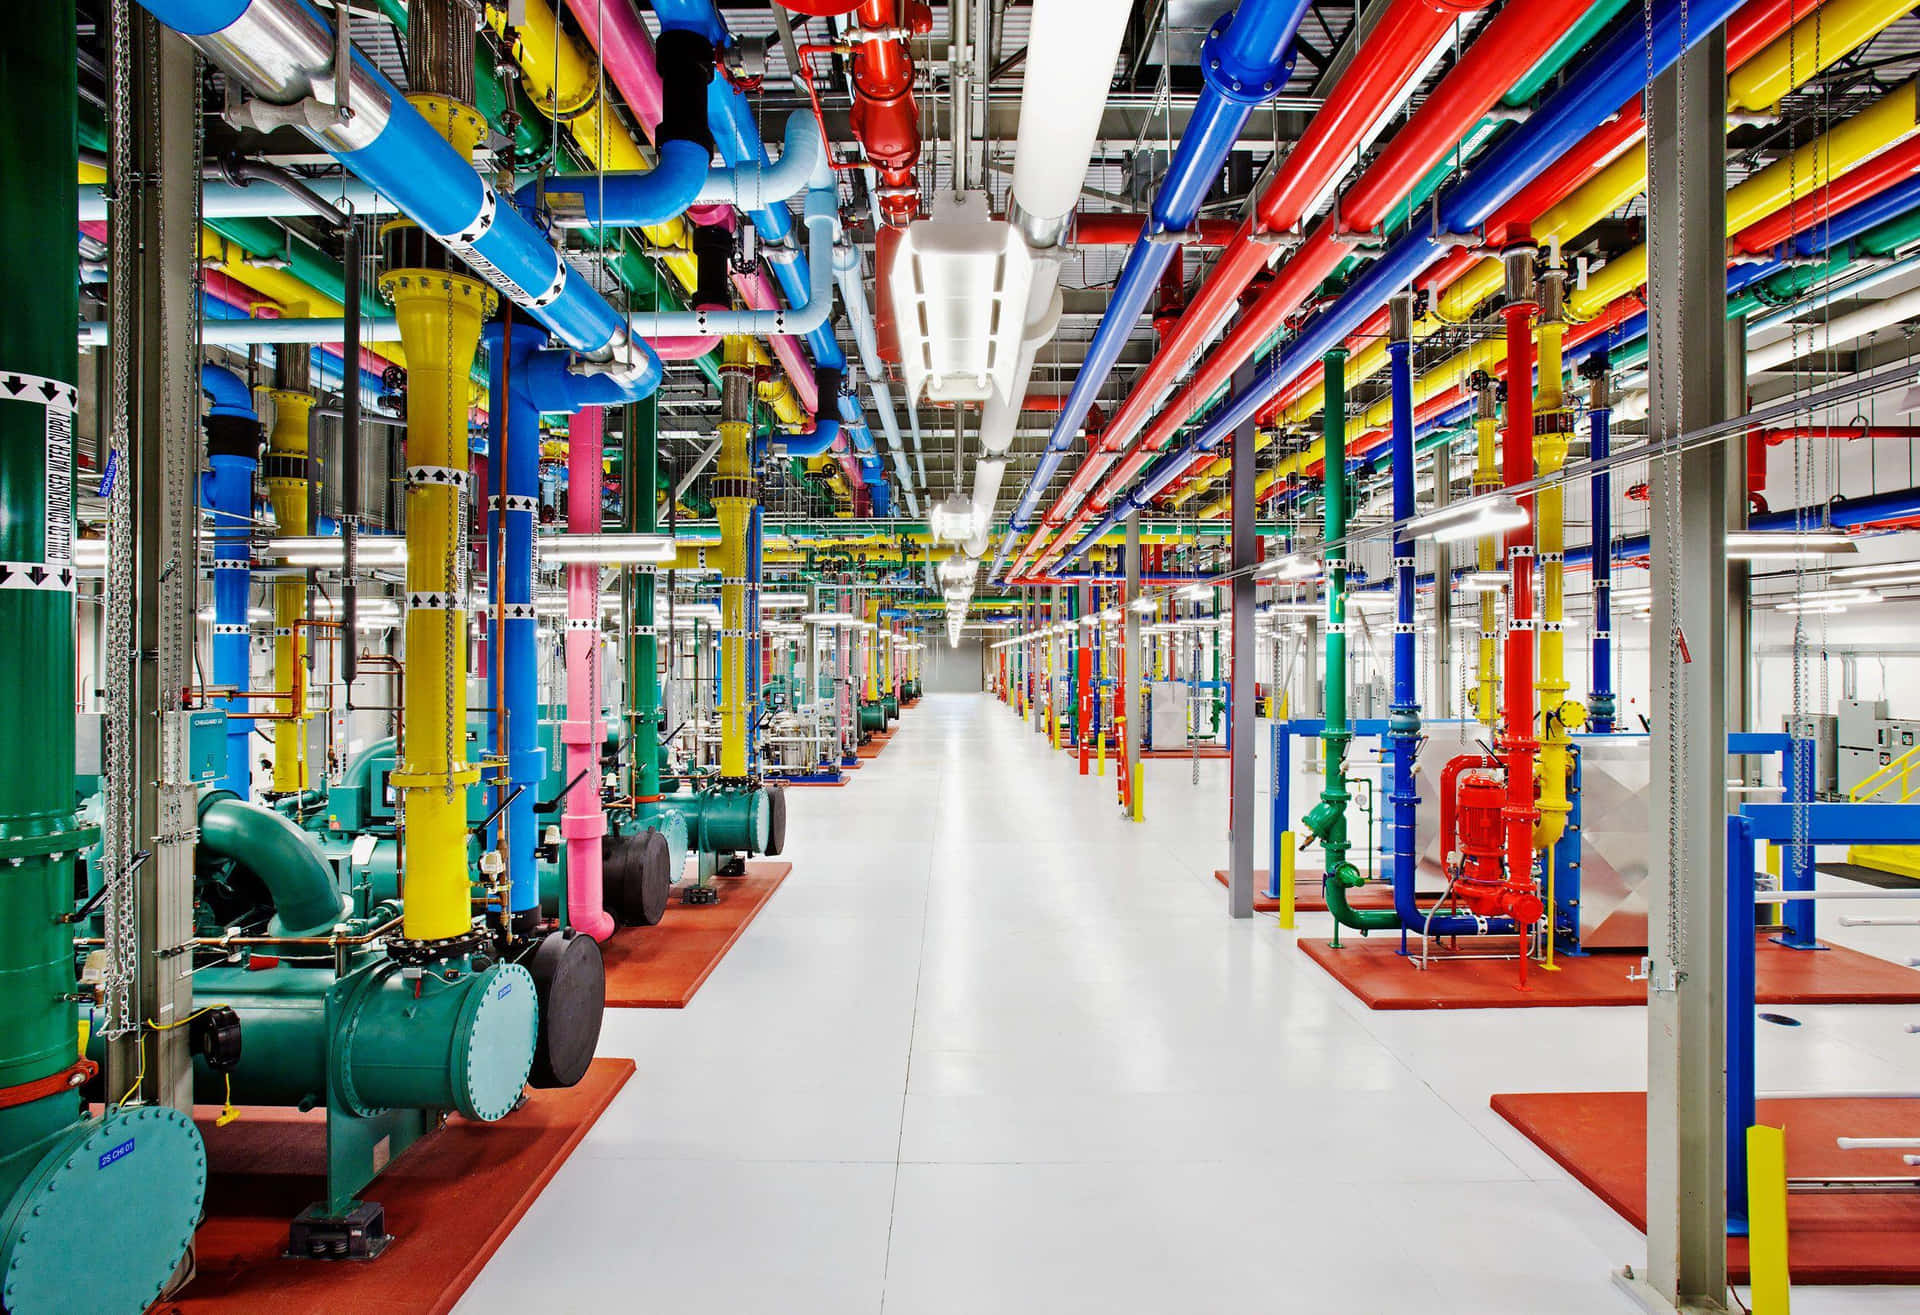 Colorful Industrial Piping Factory Hallway.jpg Wallpaper